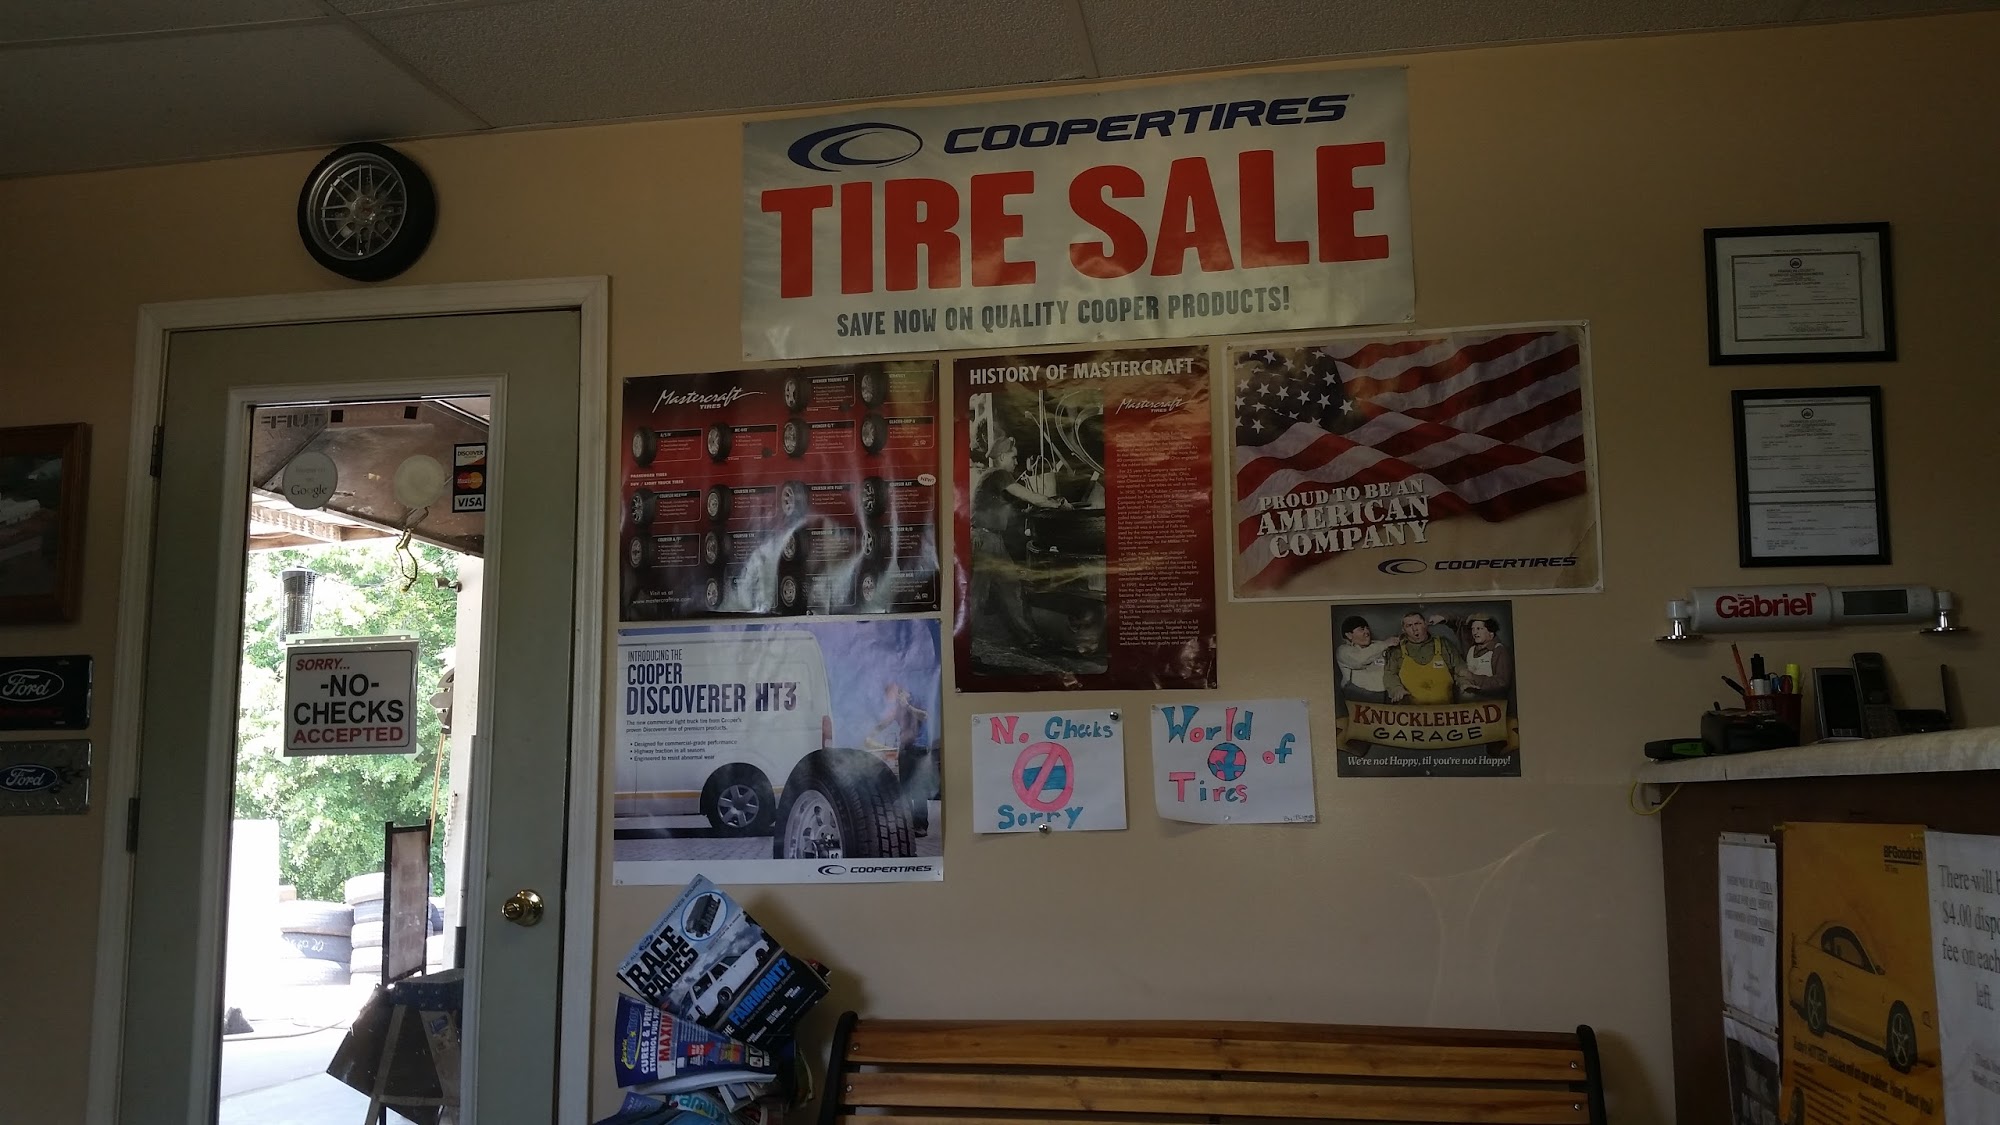 World of Tires Inc